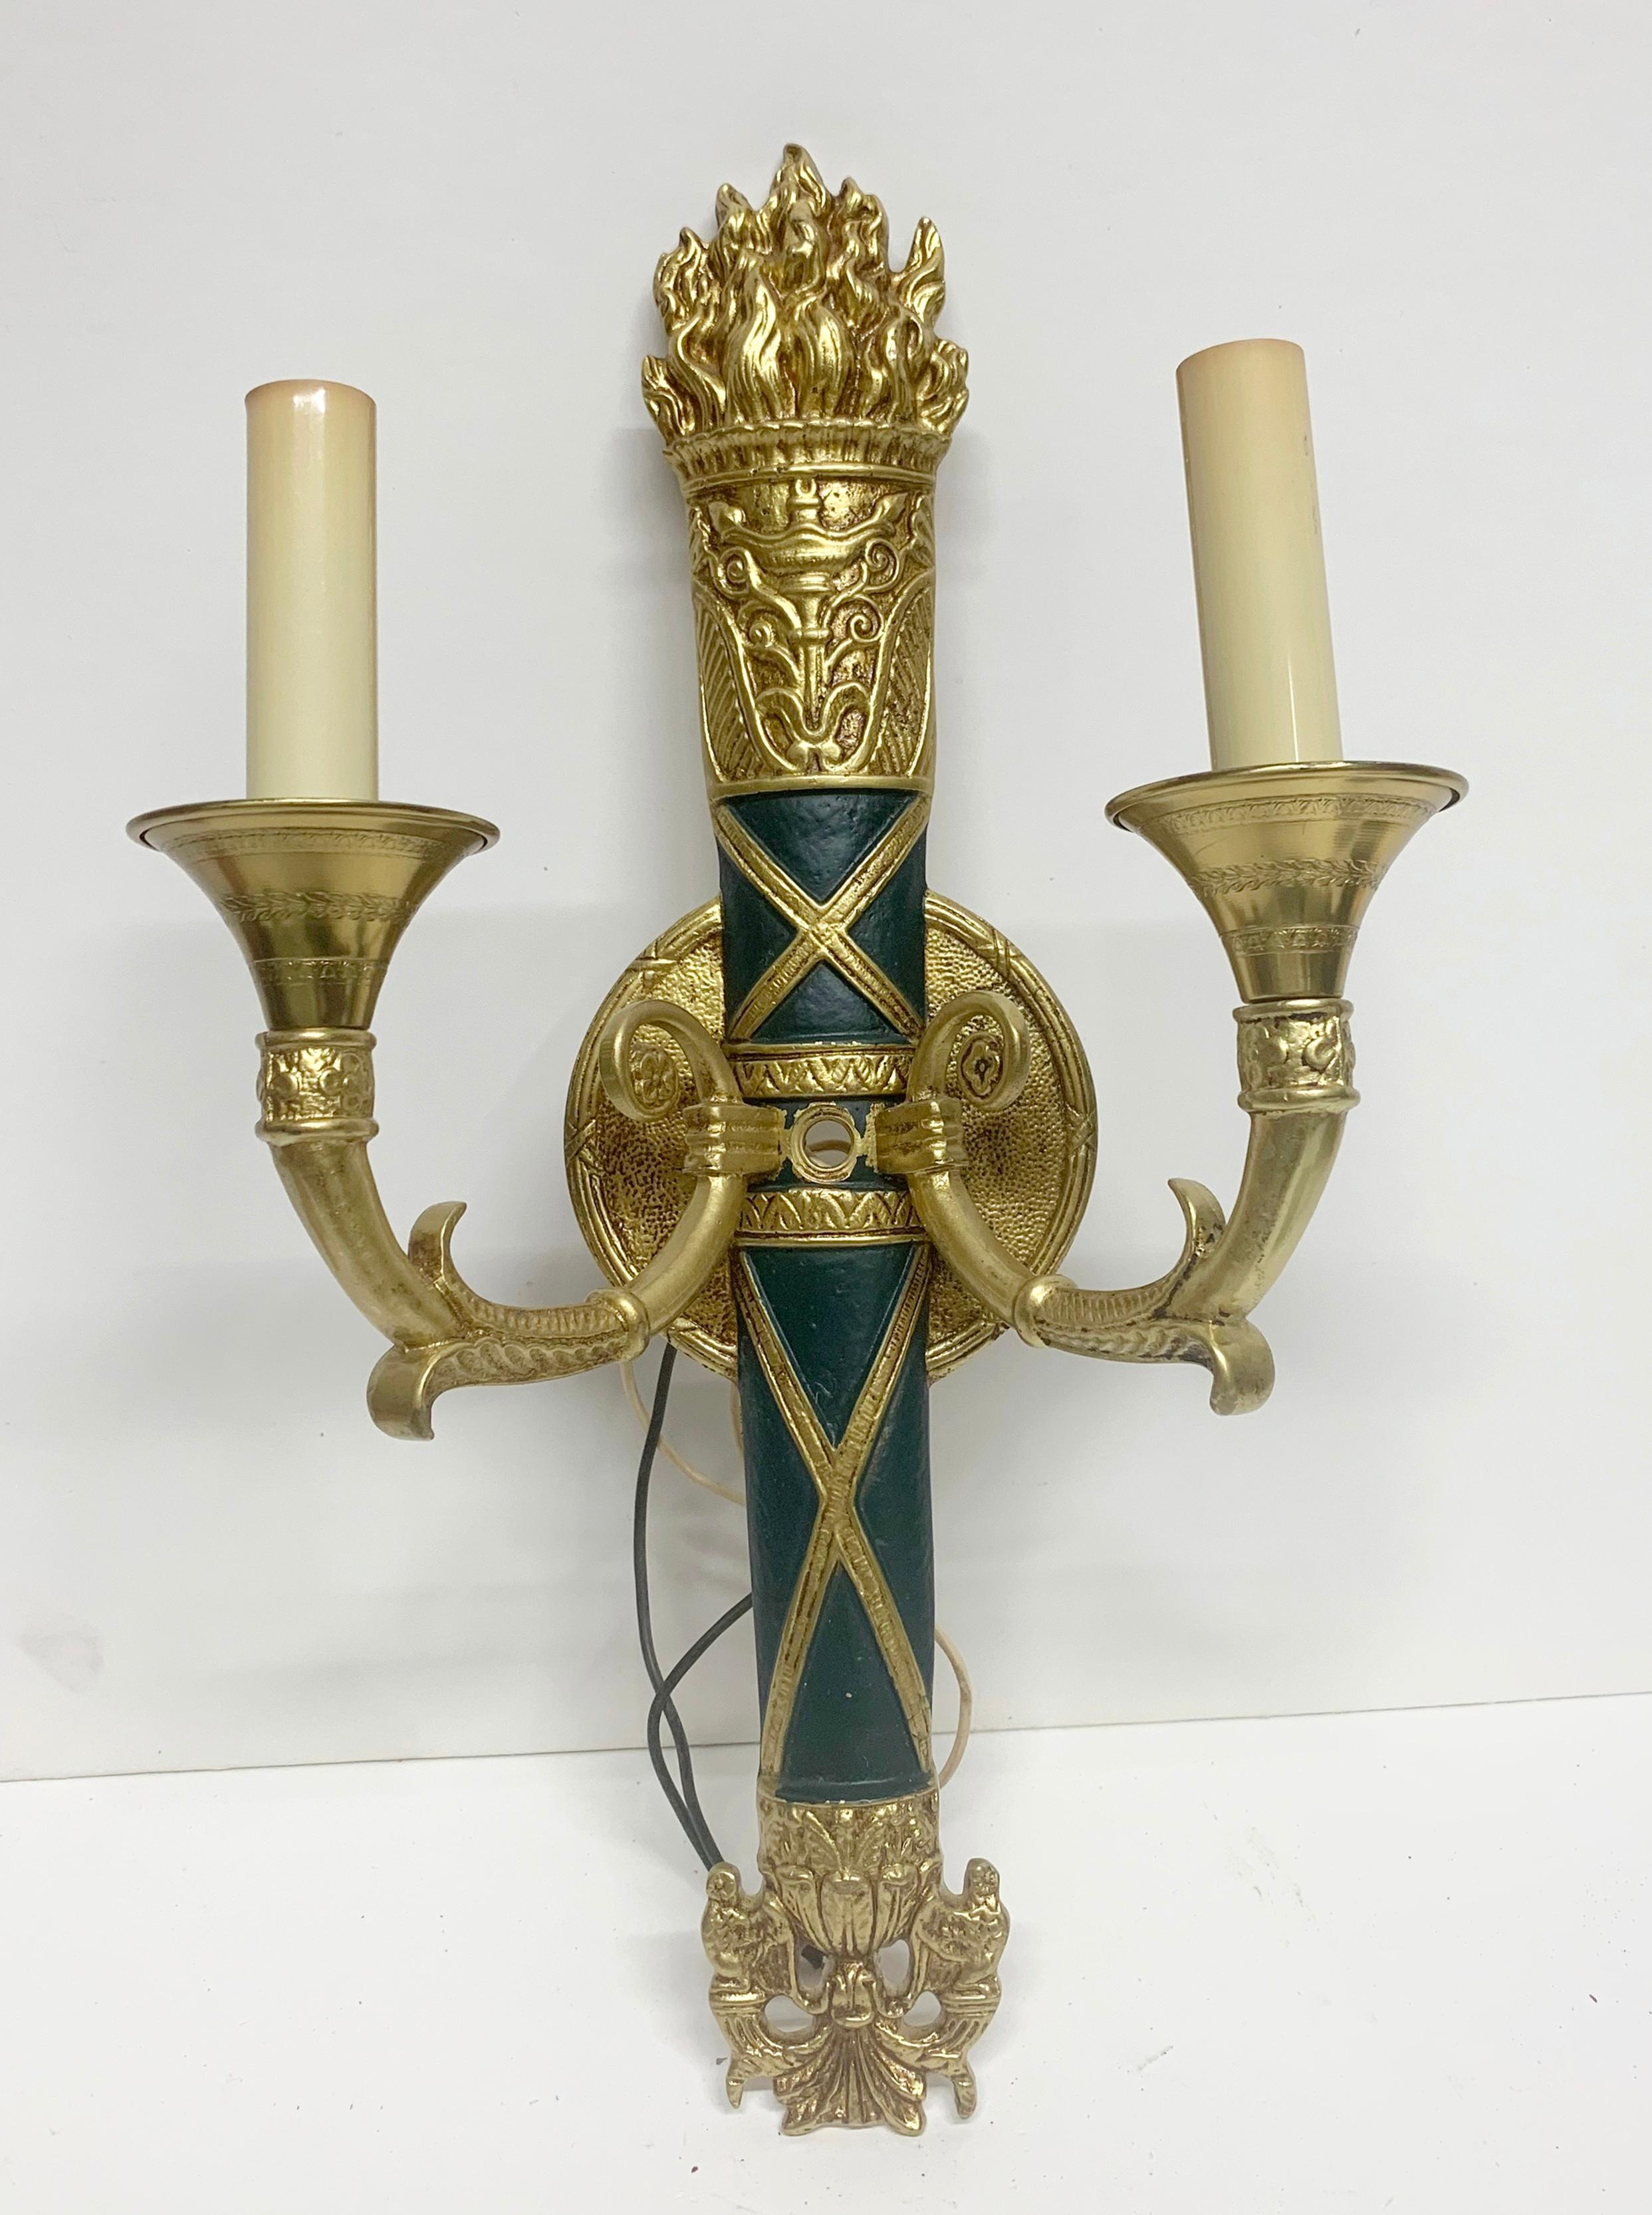 1980s cast brass two-arm sconces with emerald green and gold painted details. From the NYC Waldorf Astoria Hotel. Priced as a pair. Price includes wiring and cleaning. Please allow 1-2 weeks to process. A Waldorf Astoria authenticity card included